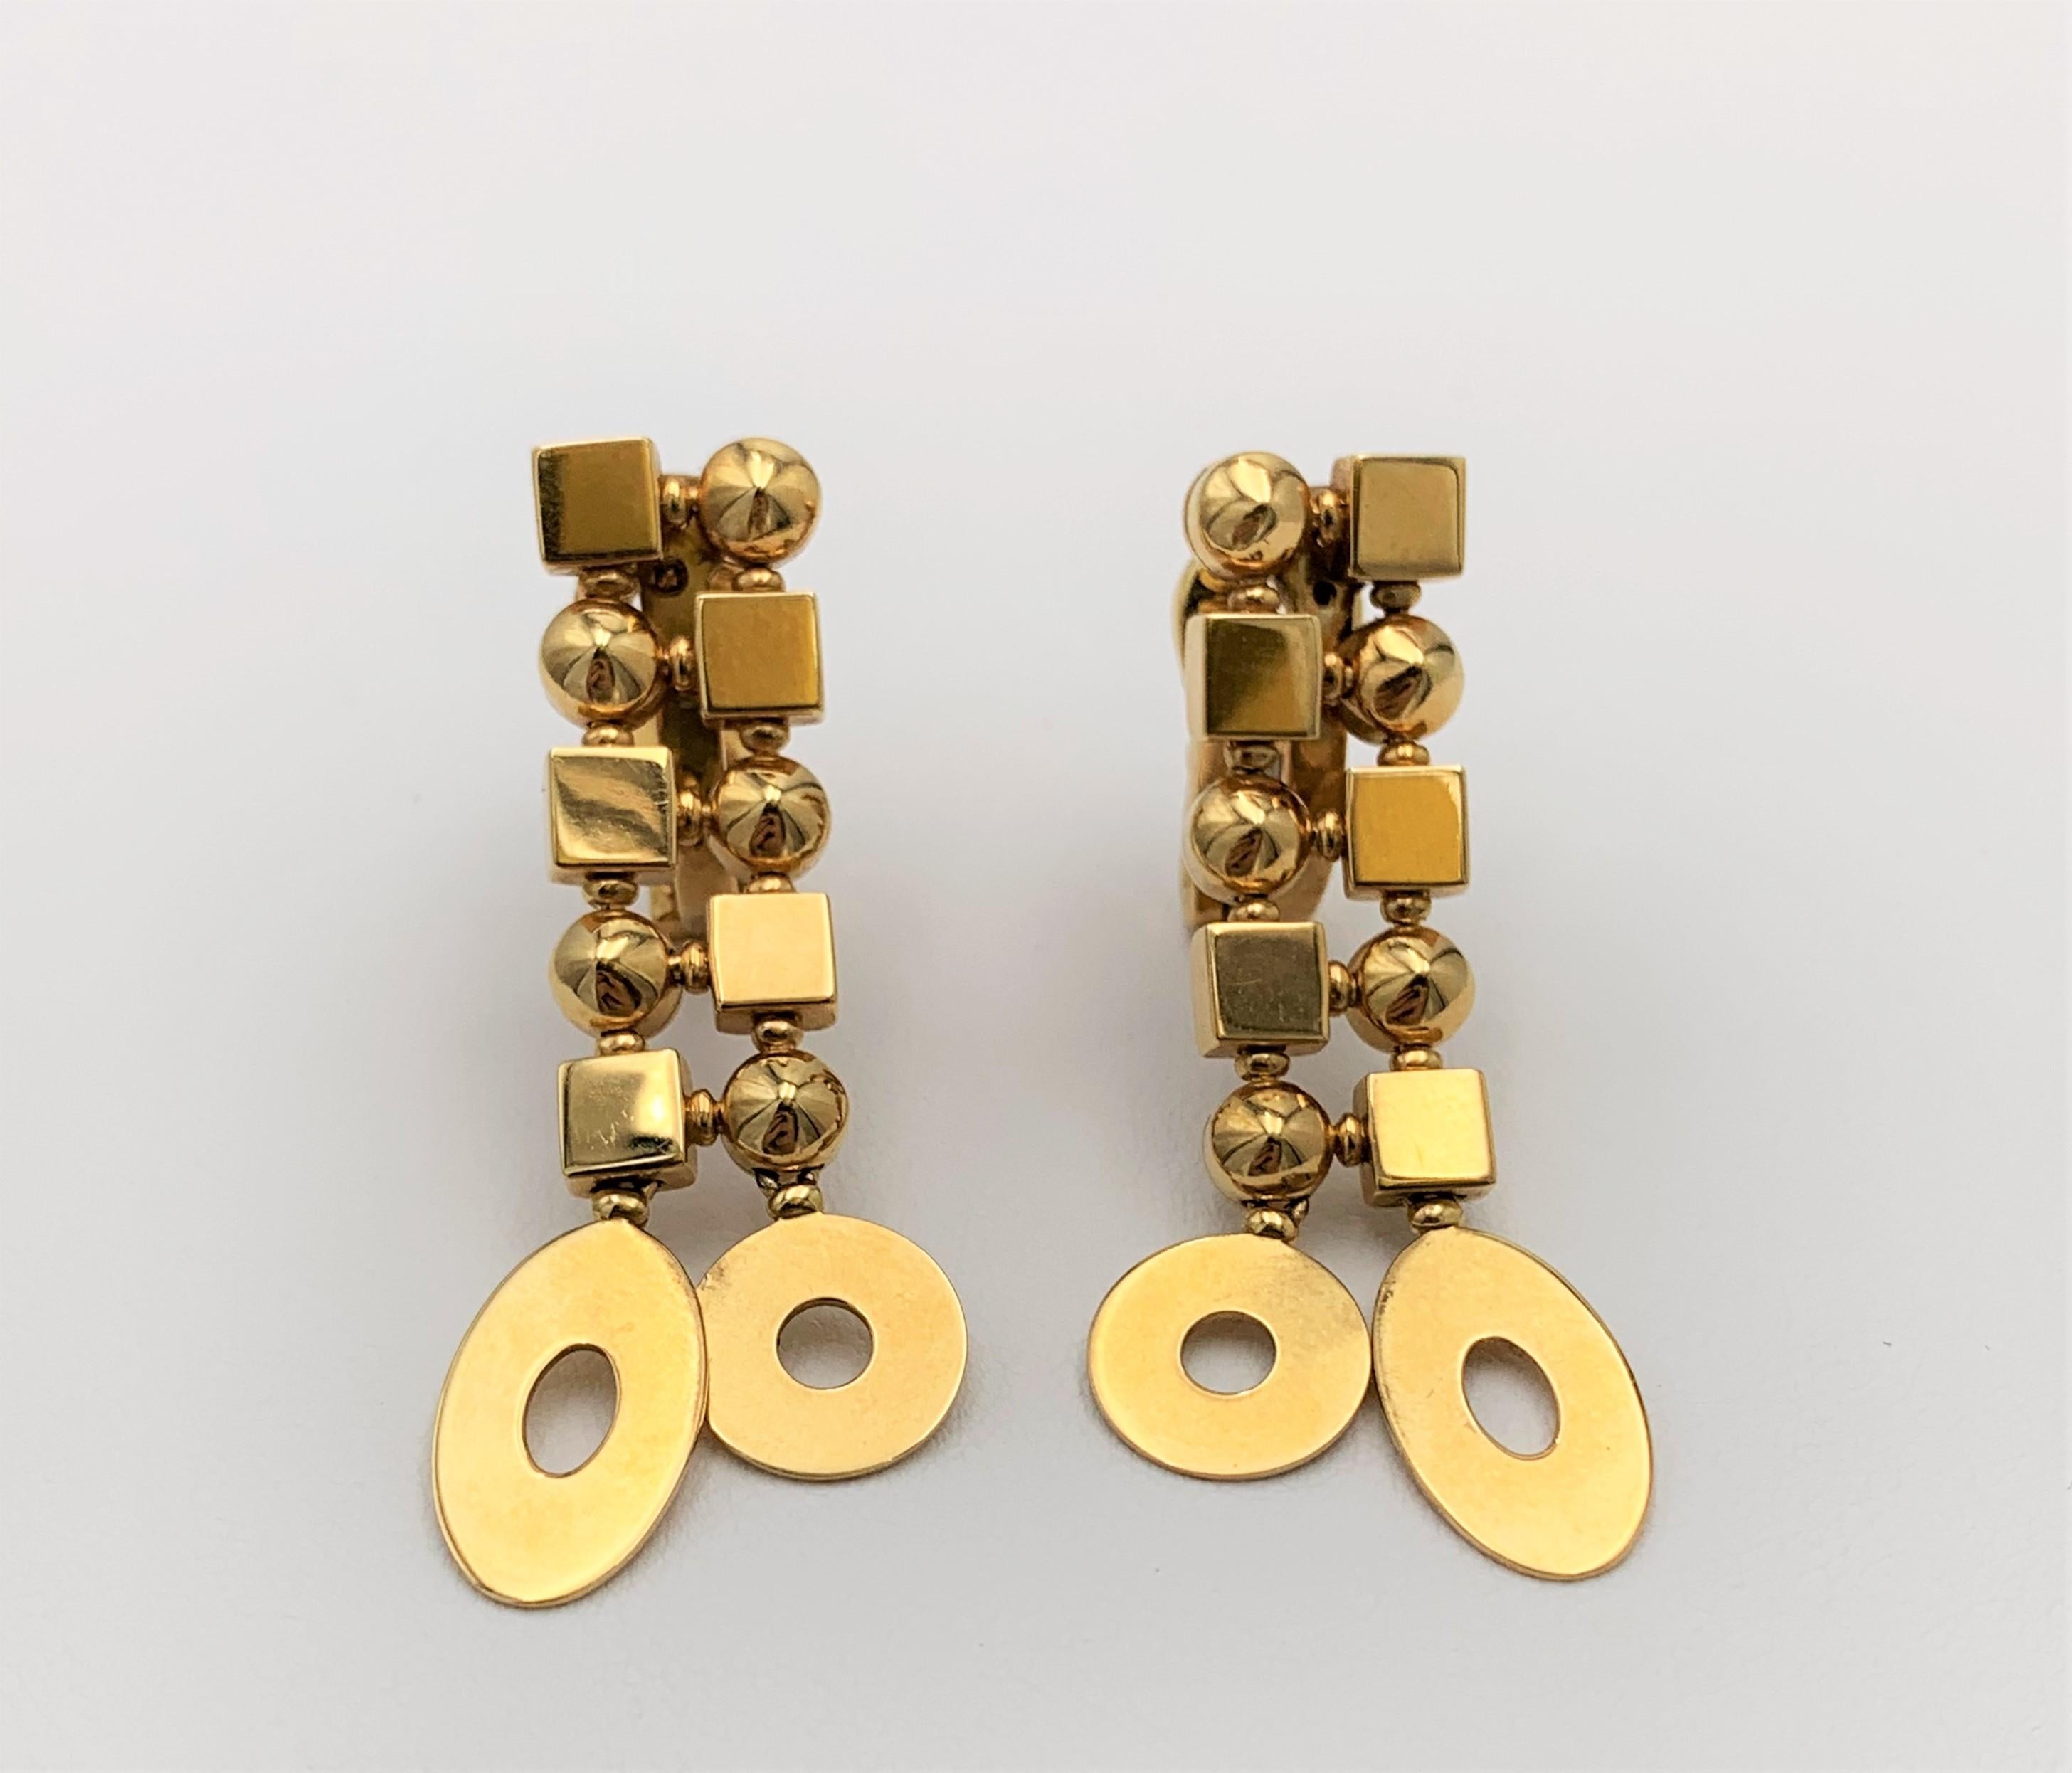 Authentic Bulgari 'Lucea' earrings crafted in 18 karat yellow gold. Signed Bulgari, Made in Italy, with hallmark. CIRCA 2000s.